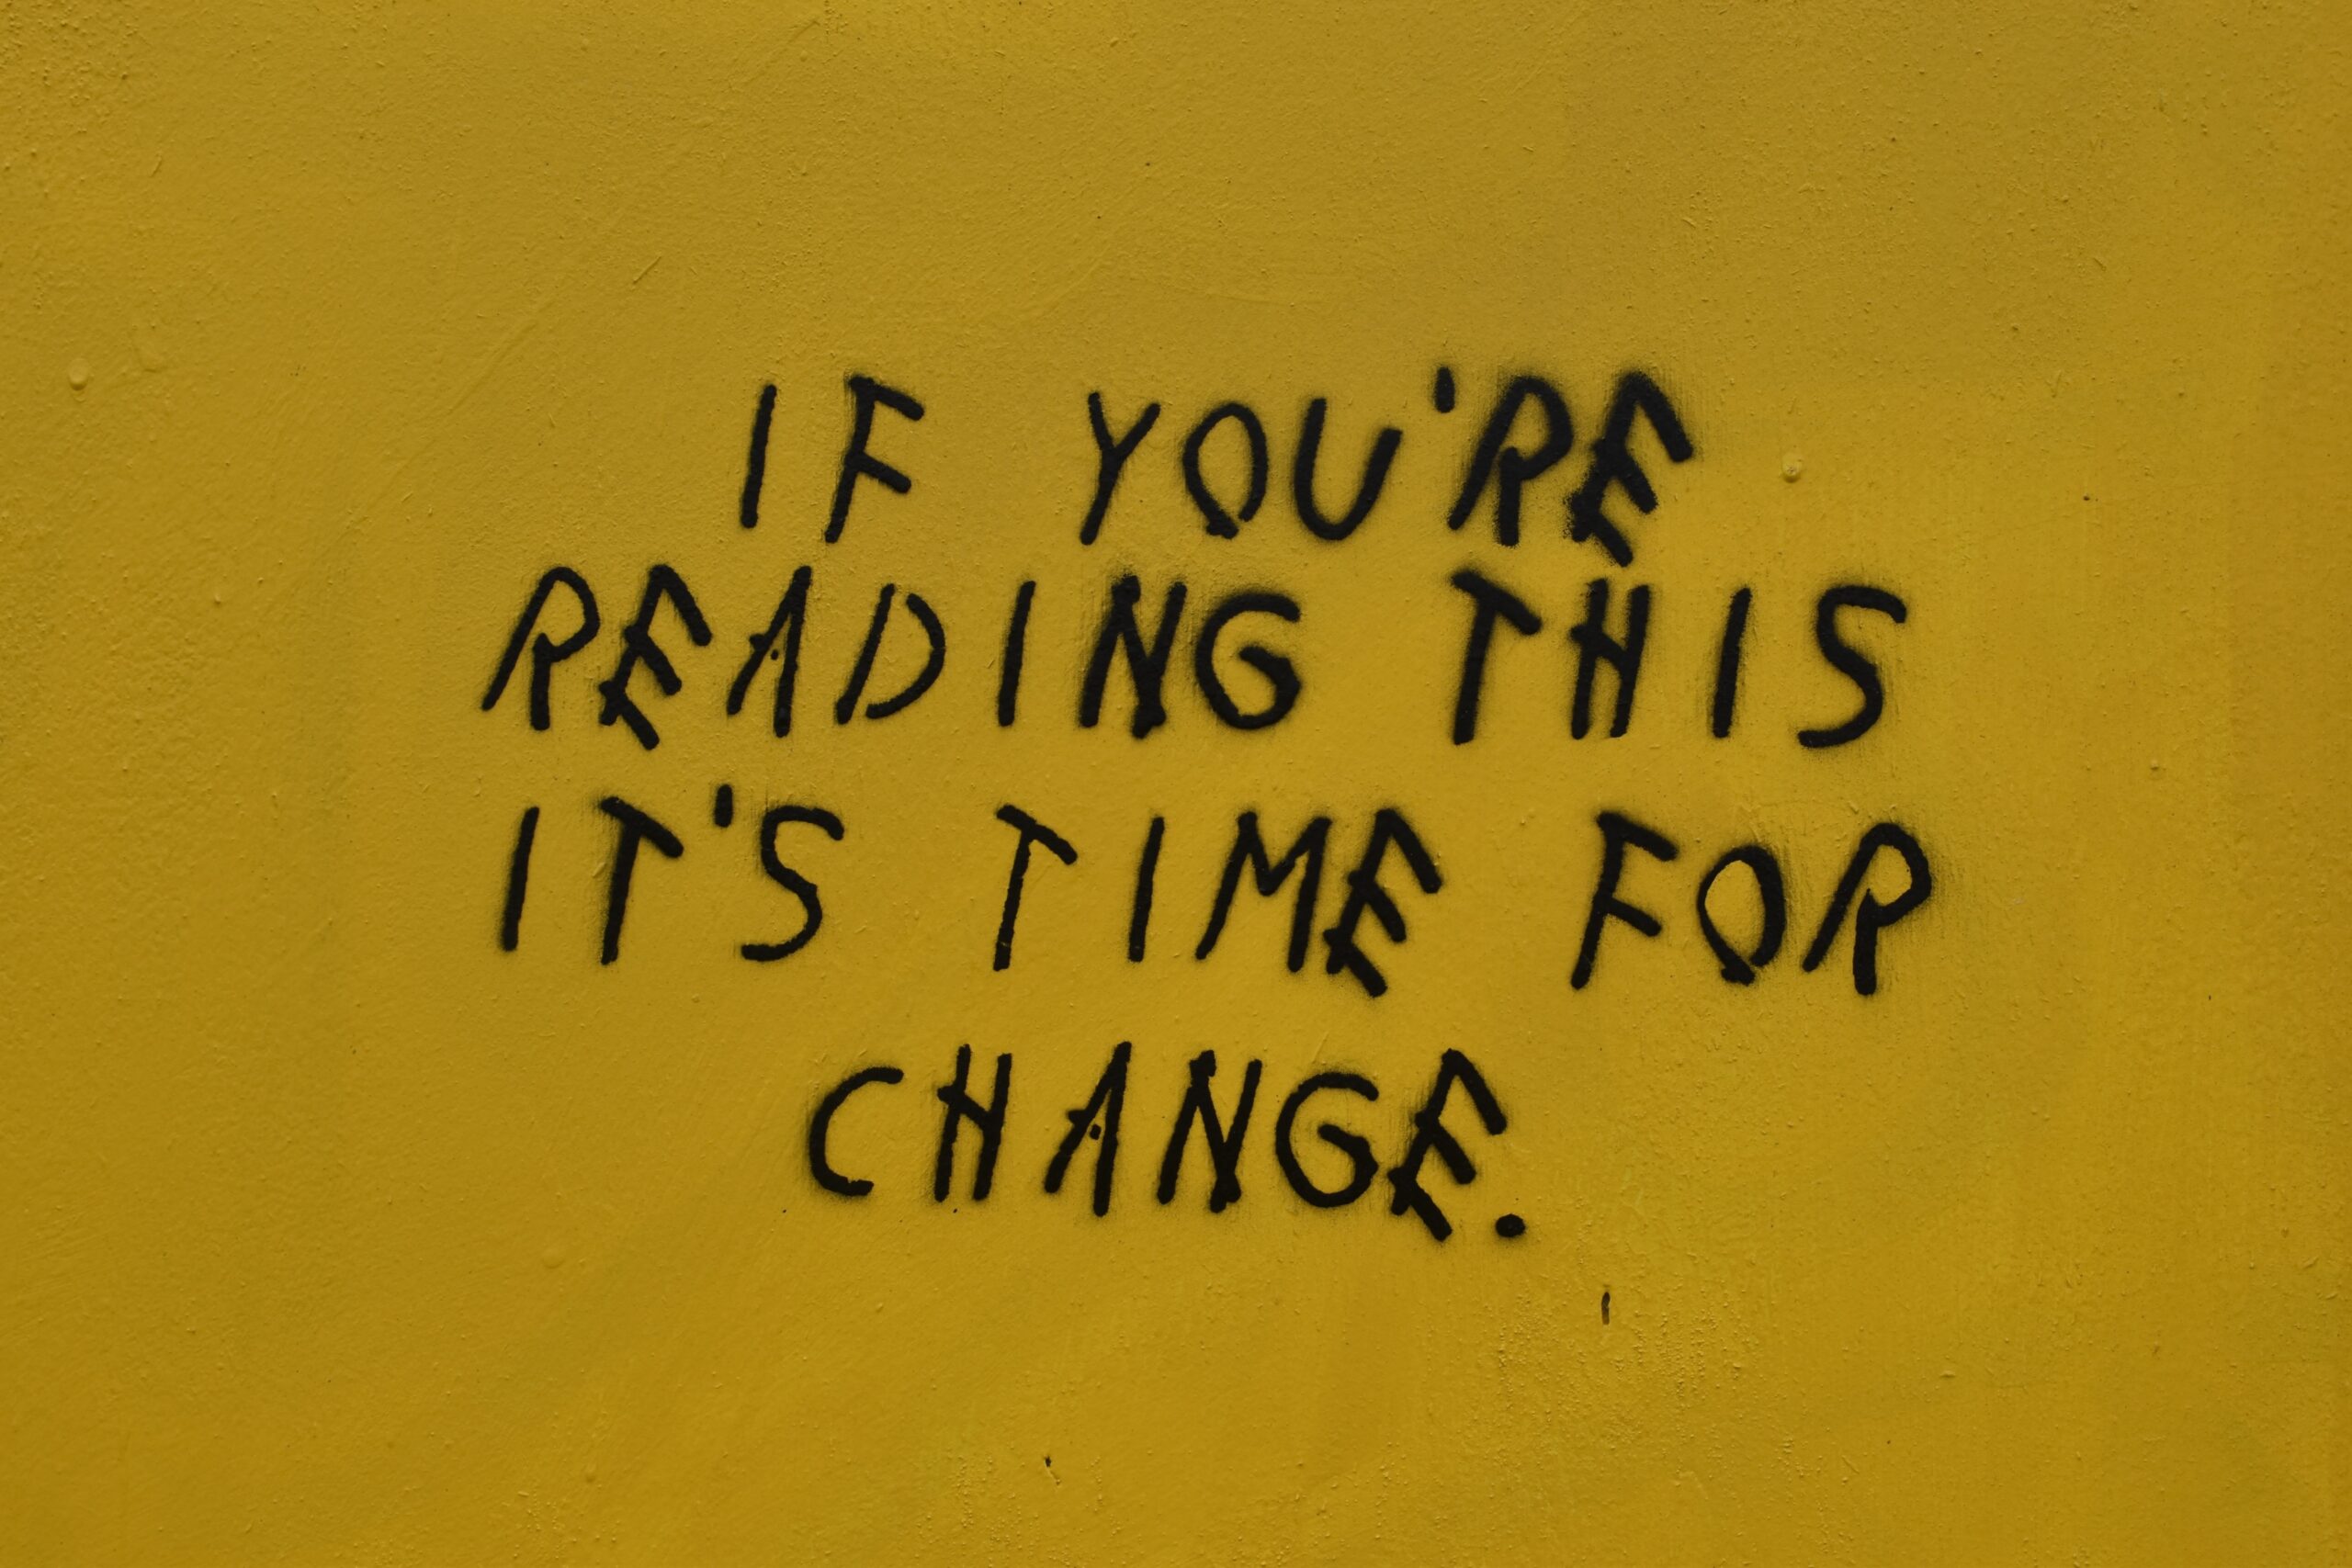 Quote, "If You're Reading This It's Time for Change"